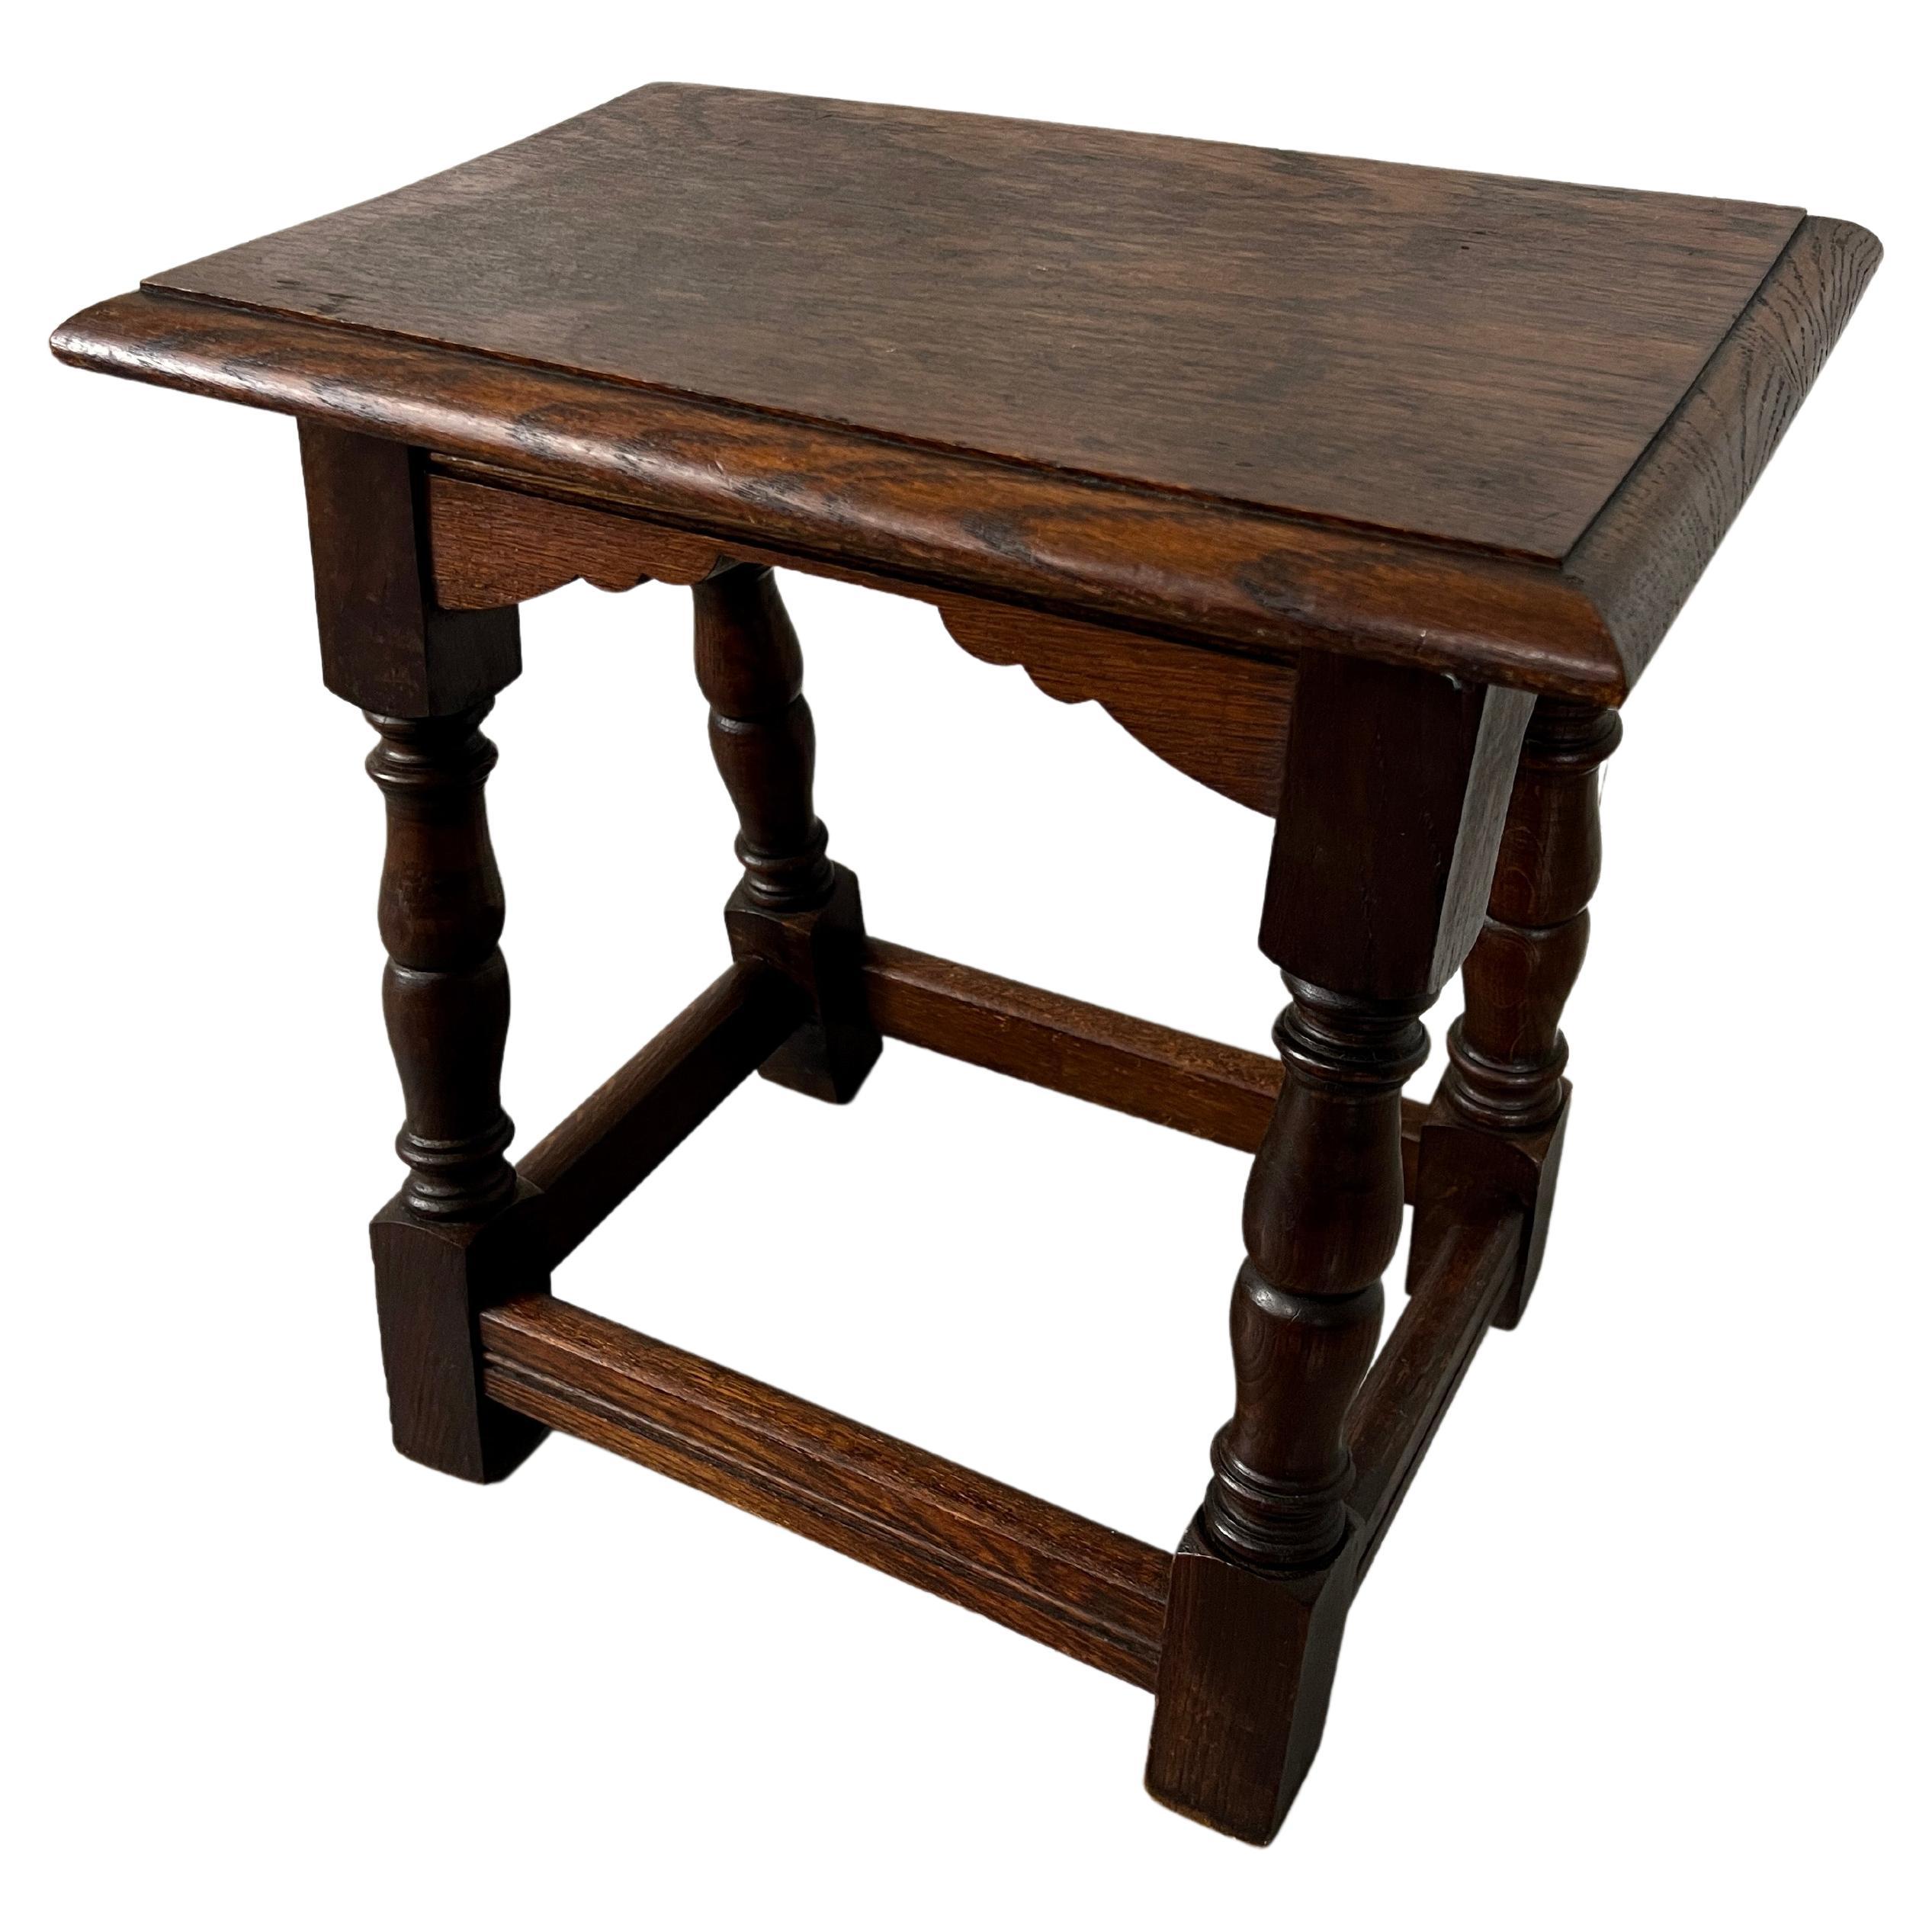 Antique Rustic Stool / Table For Sale